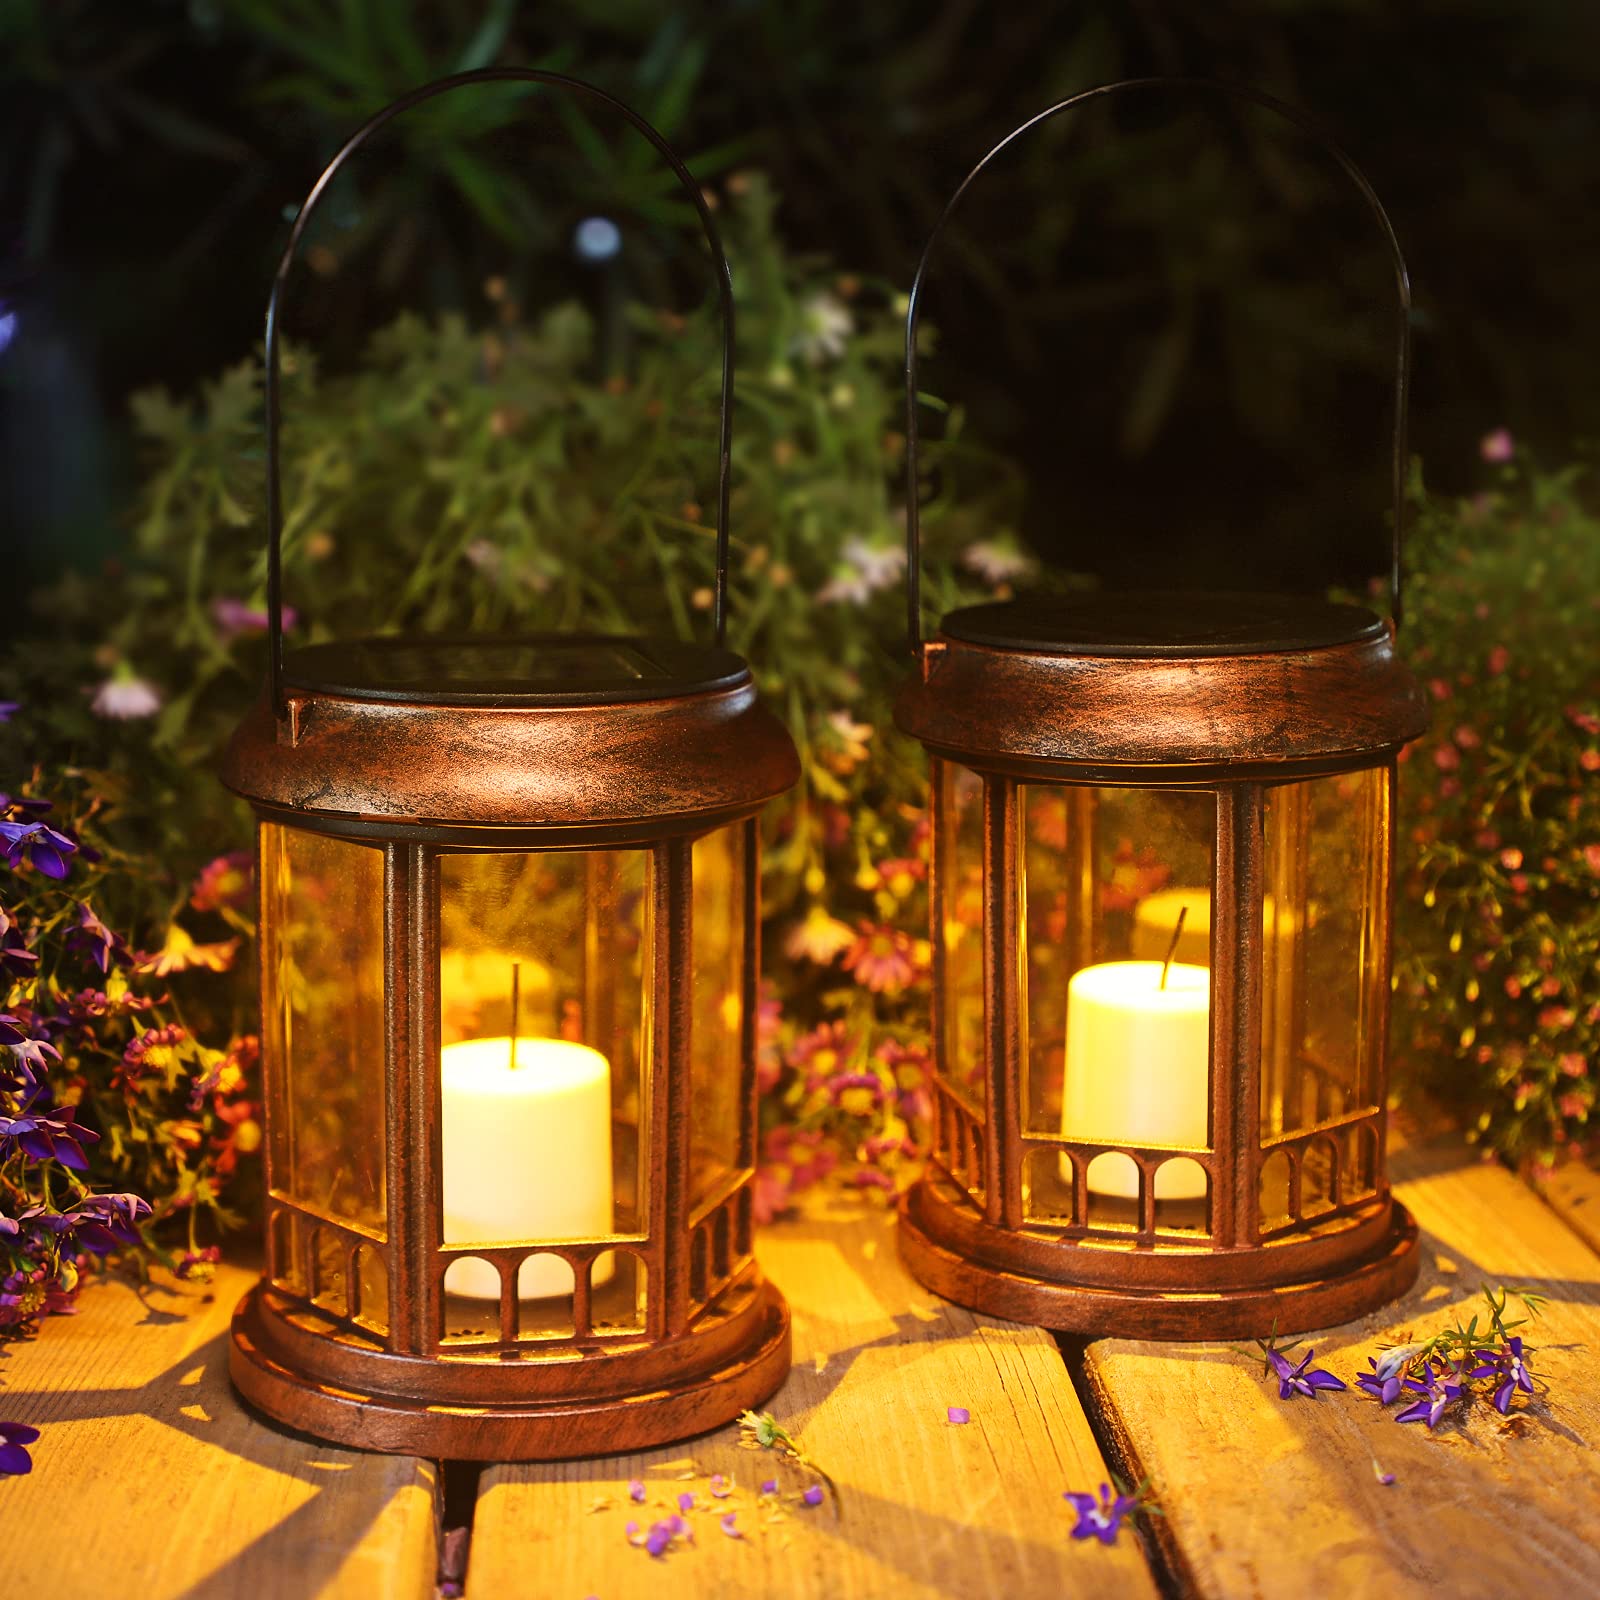 2 Pack Solar Lantern, 3 in 1 Outdoor Lanterns with Stake, Warm White LED Solar Lights Outdoor Decorative Waterproof for Christmas Garden Patio Yard Lawn (Bronze)